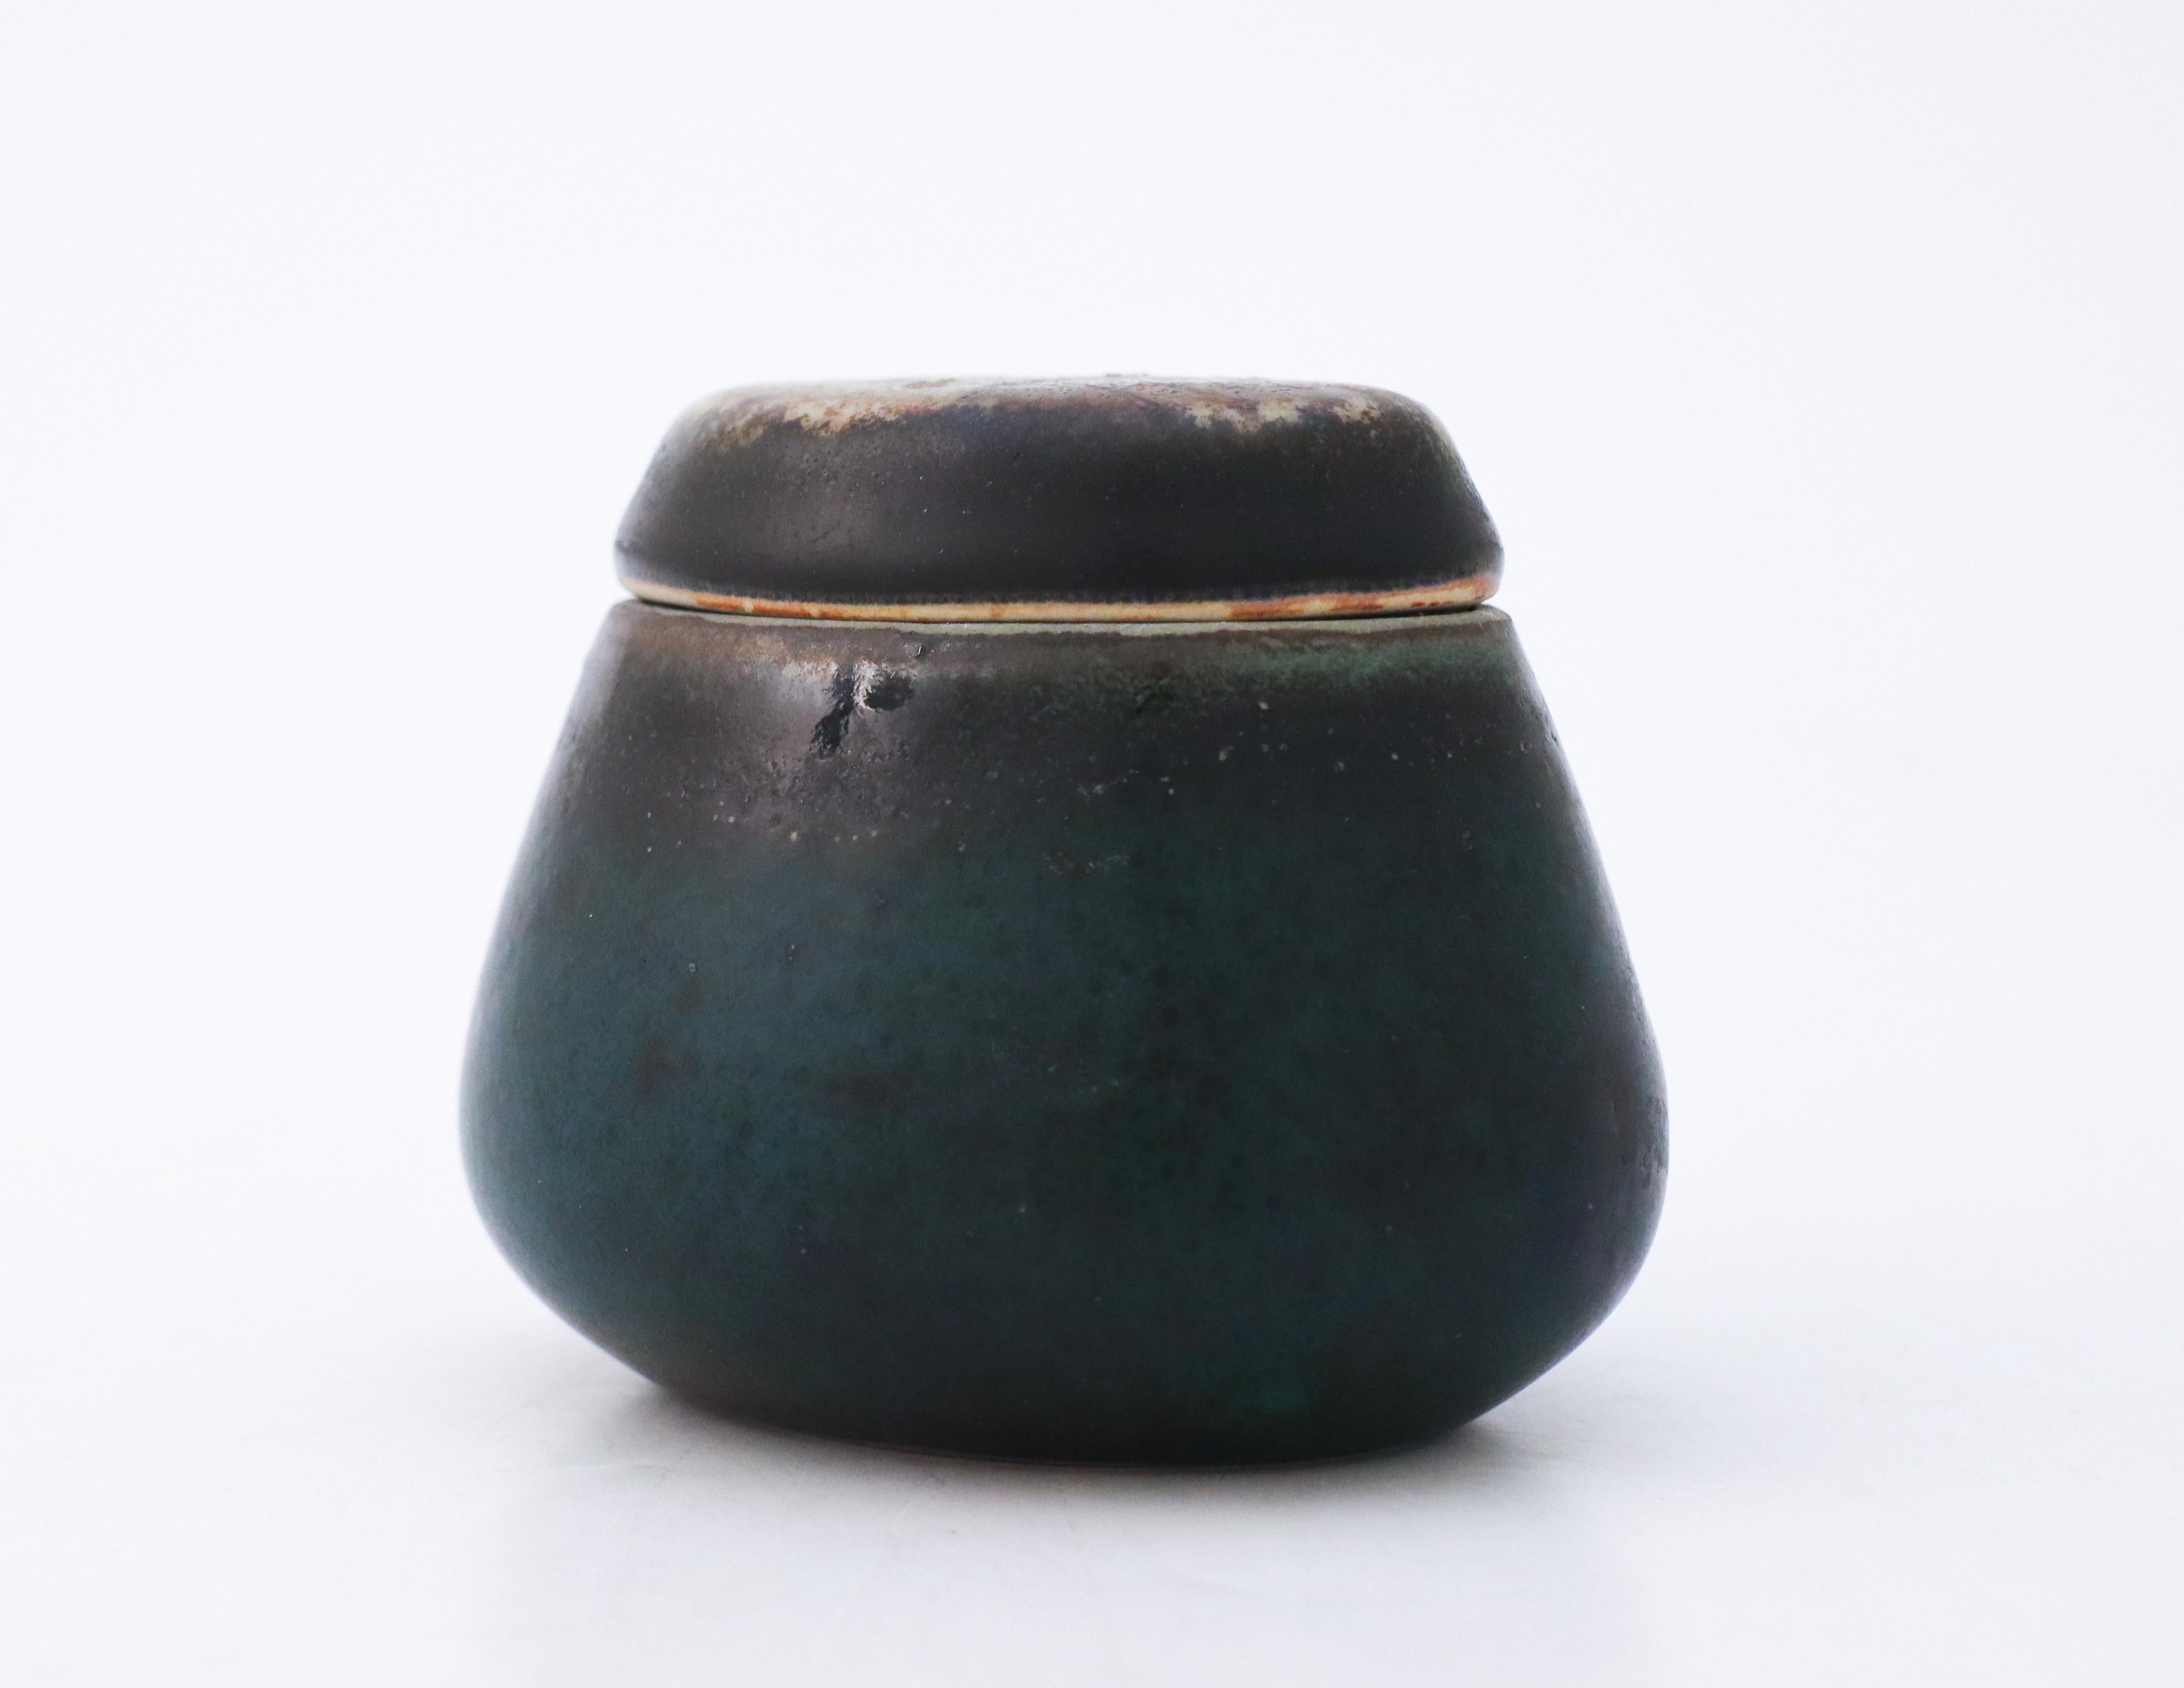 A lidded bowl designed by Carl-Harry Stålhane at Rörstrand Atelier. It is 7.5 cm (3